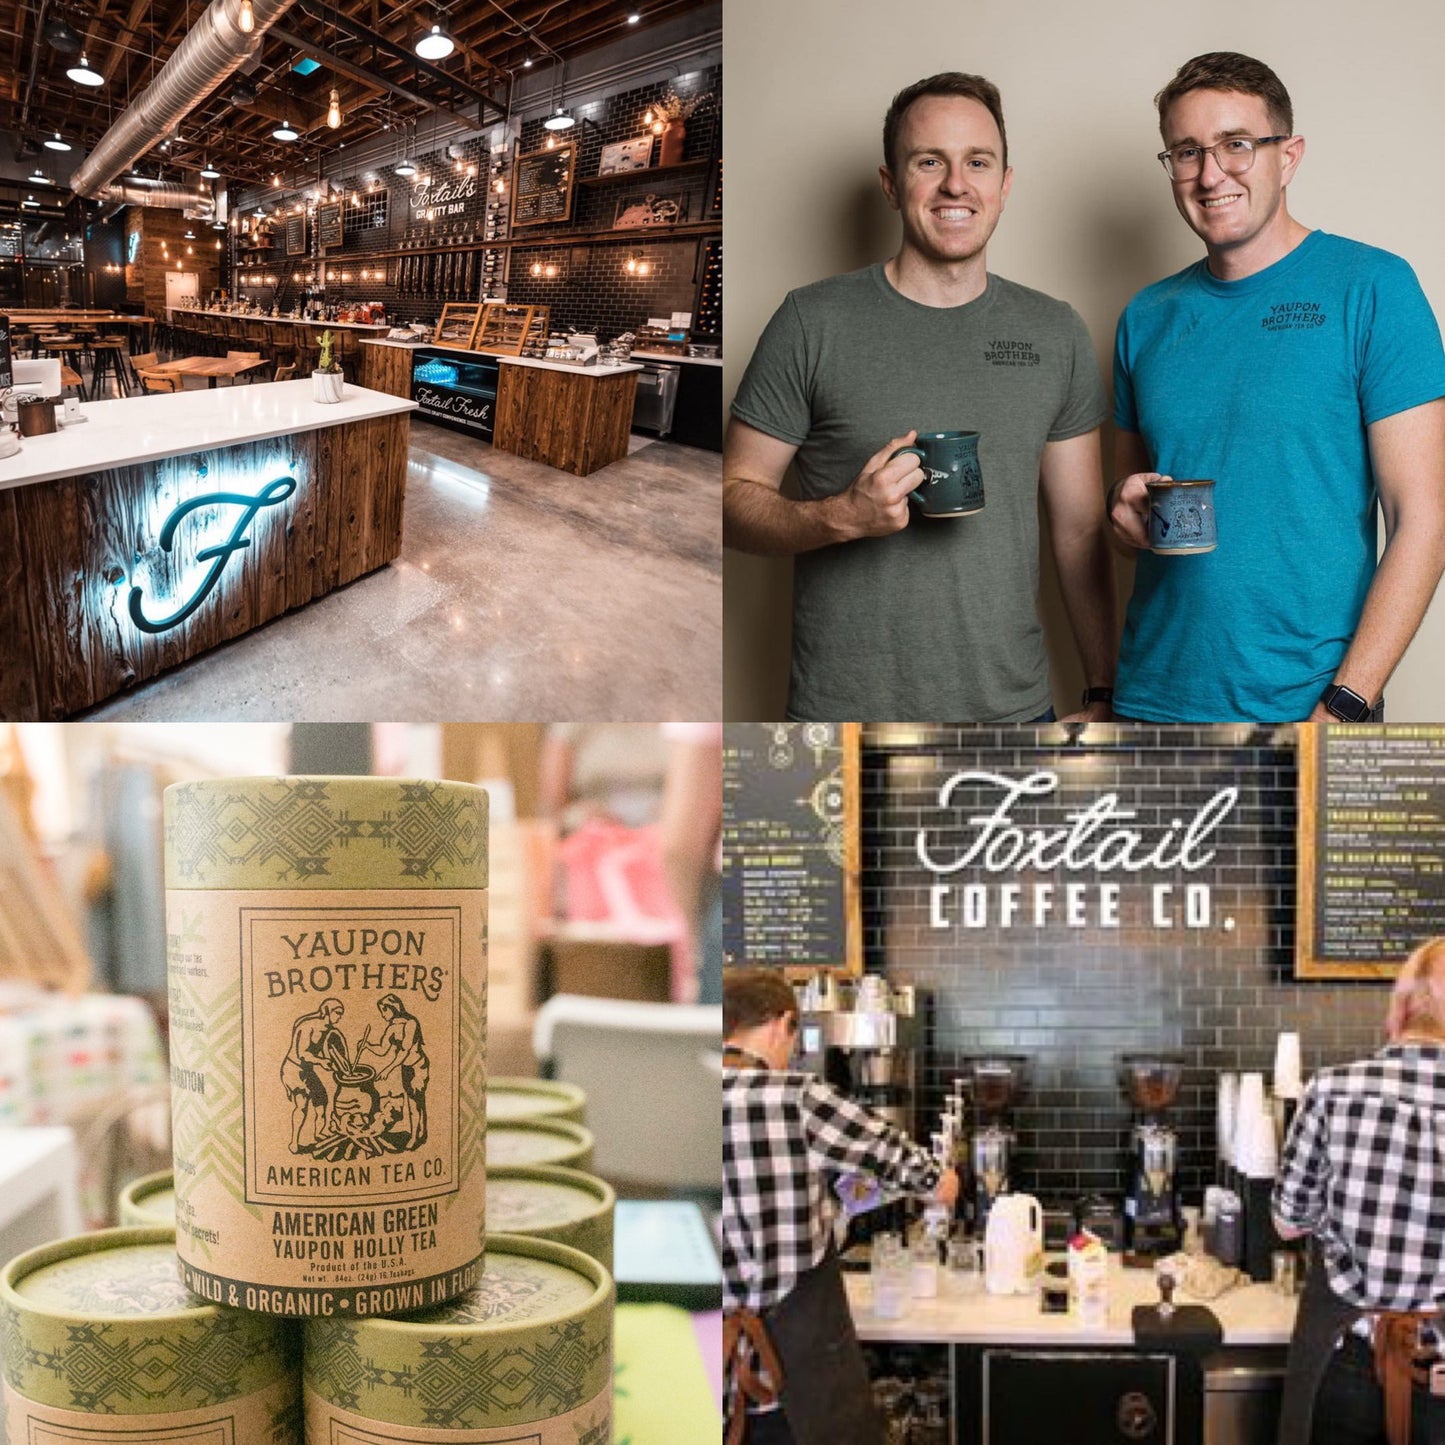 Yaupon Brothers Partners with Foxtail Coffee